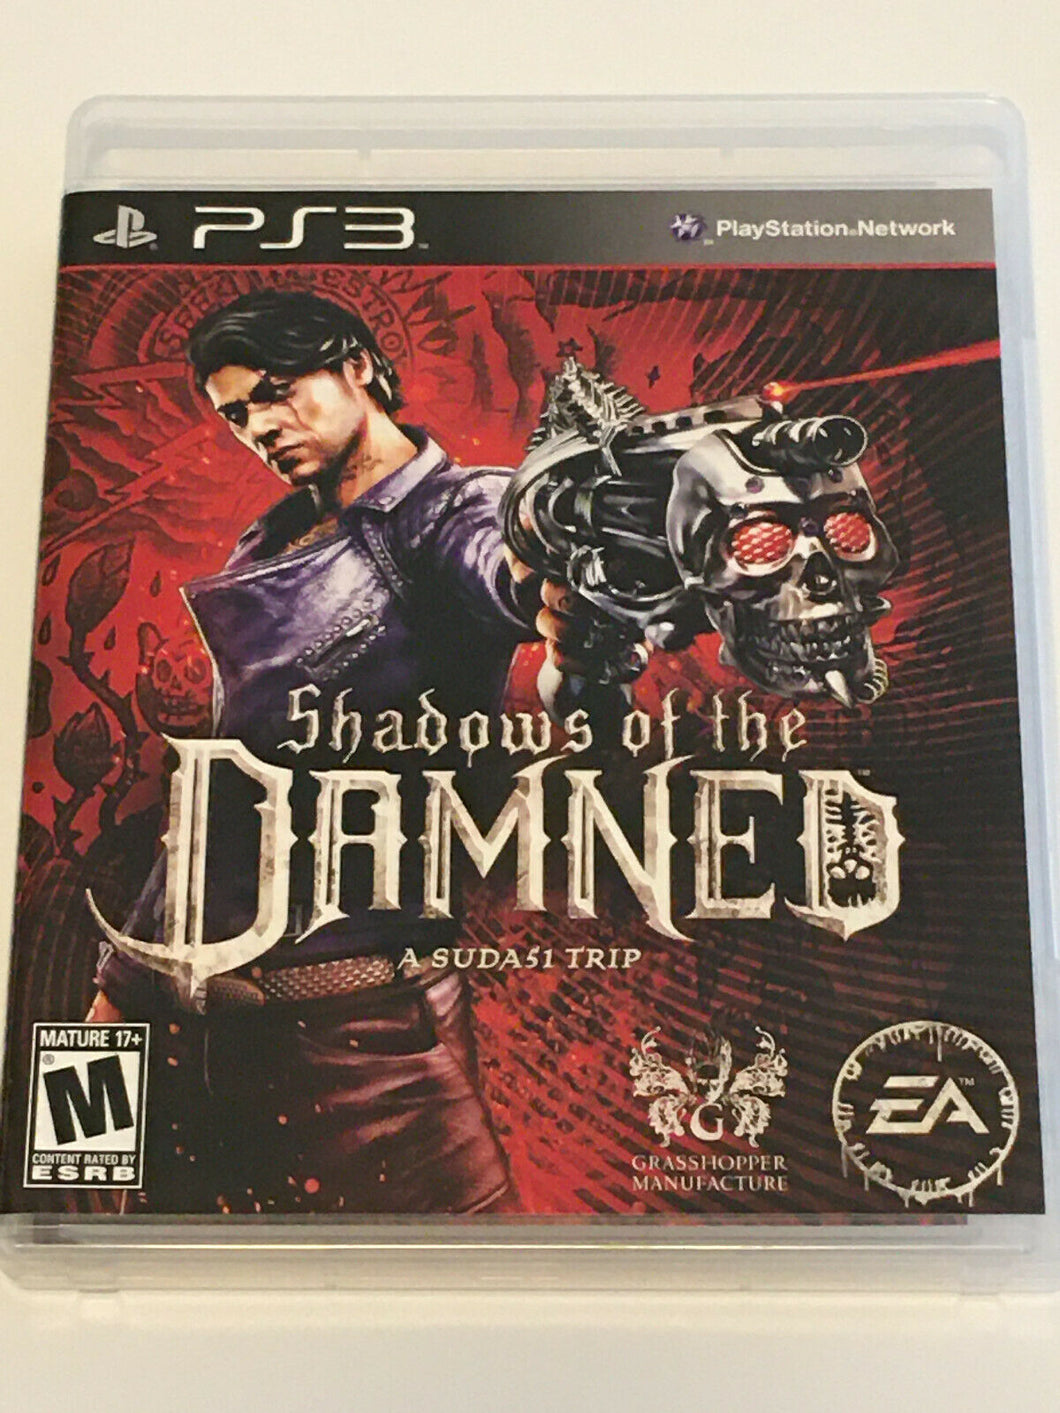 Shadows of the Damned (pre-owned)